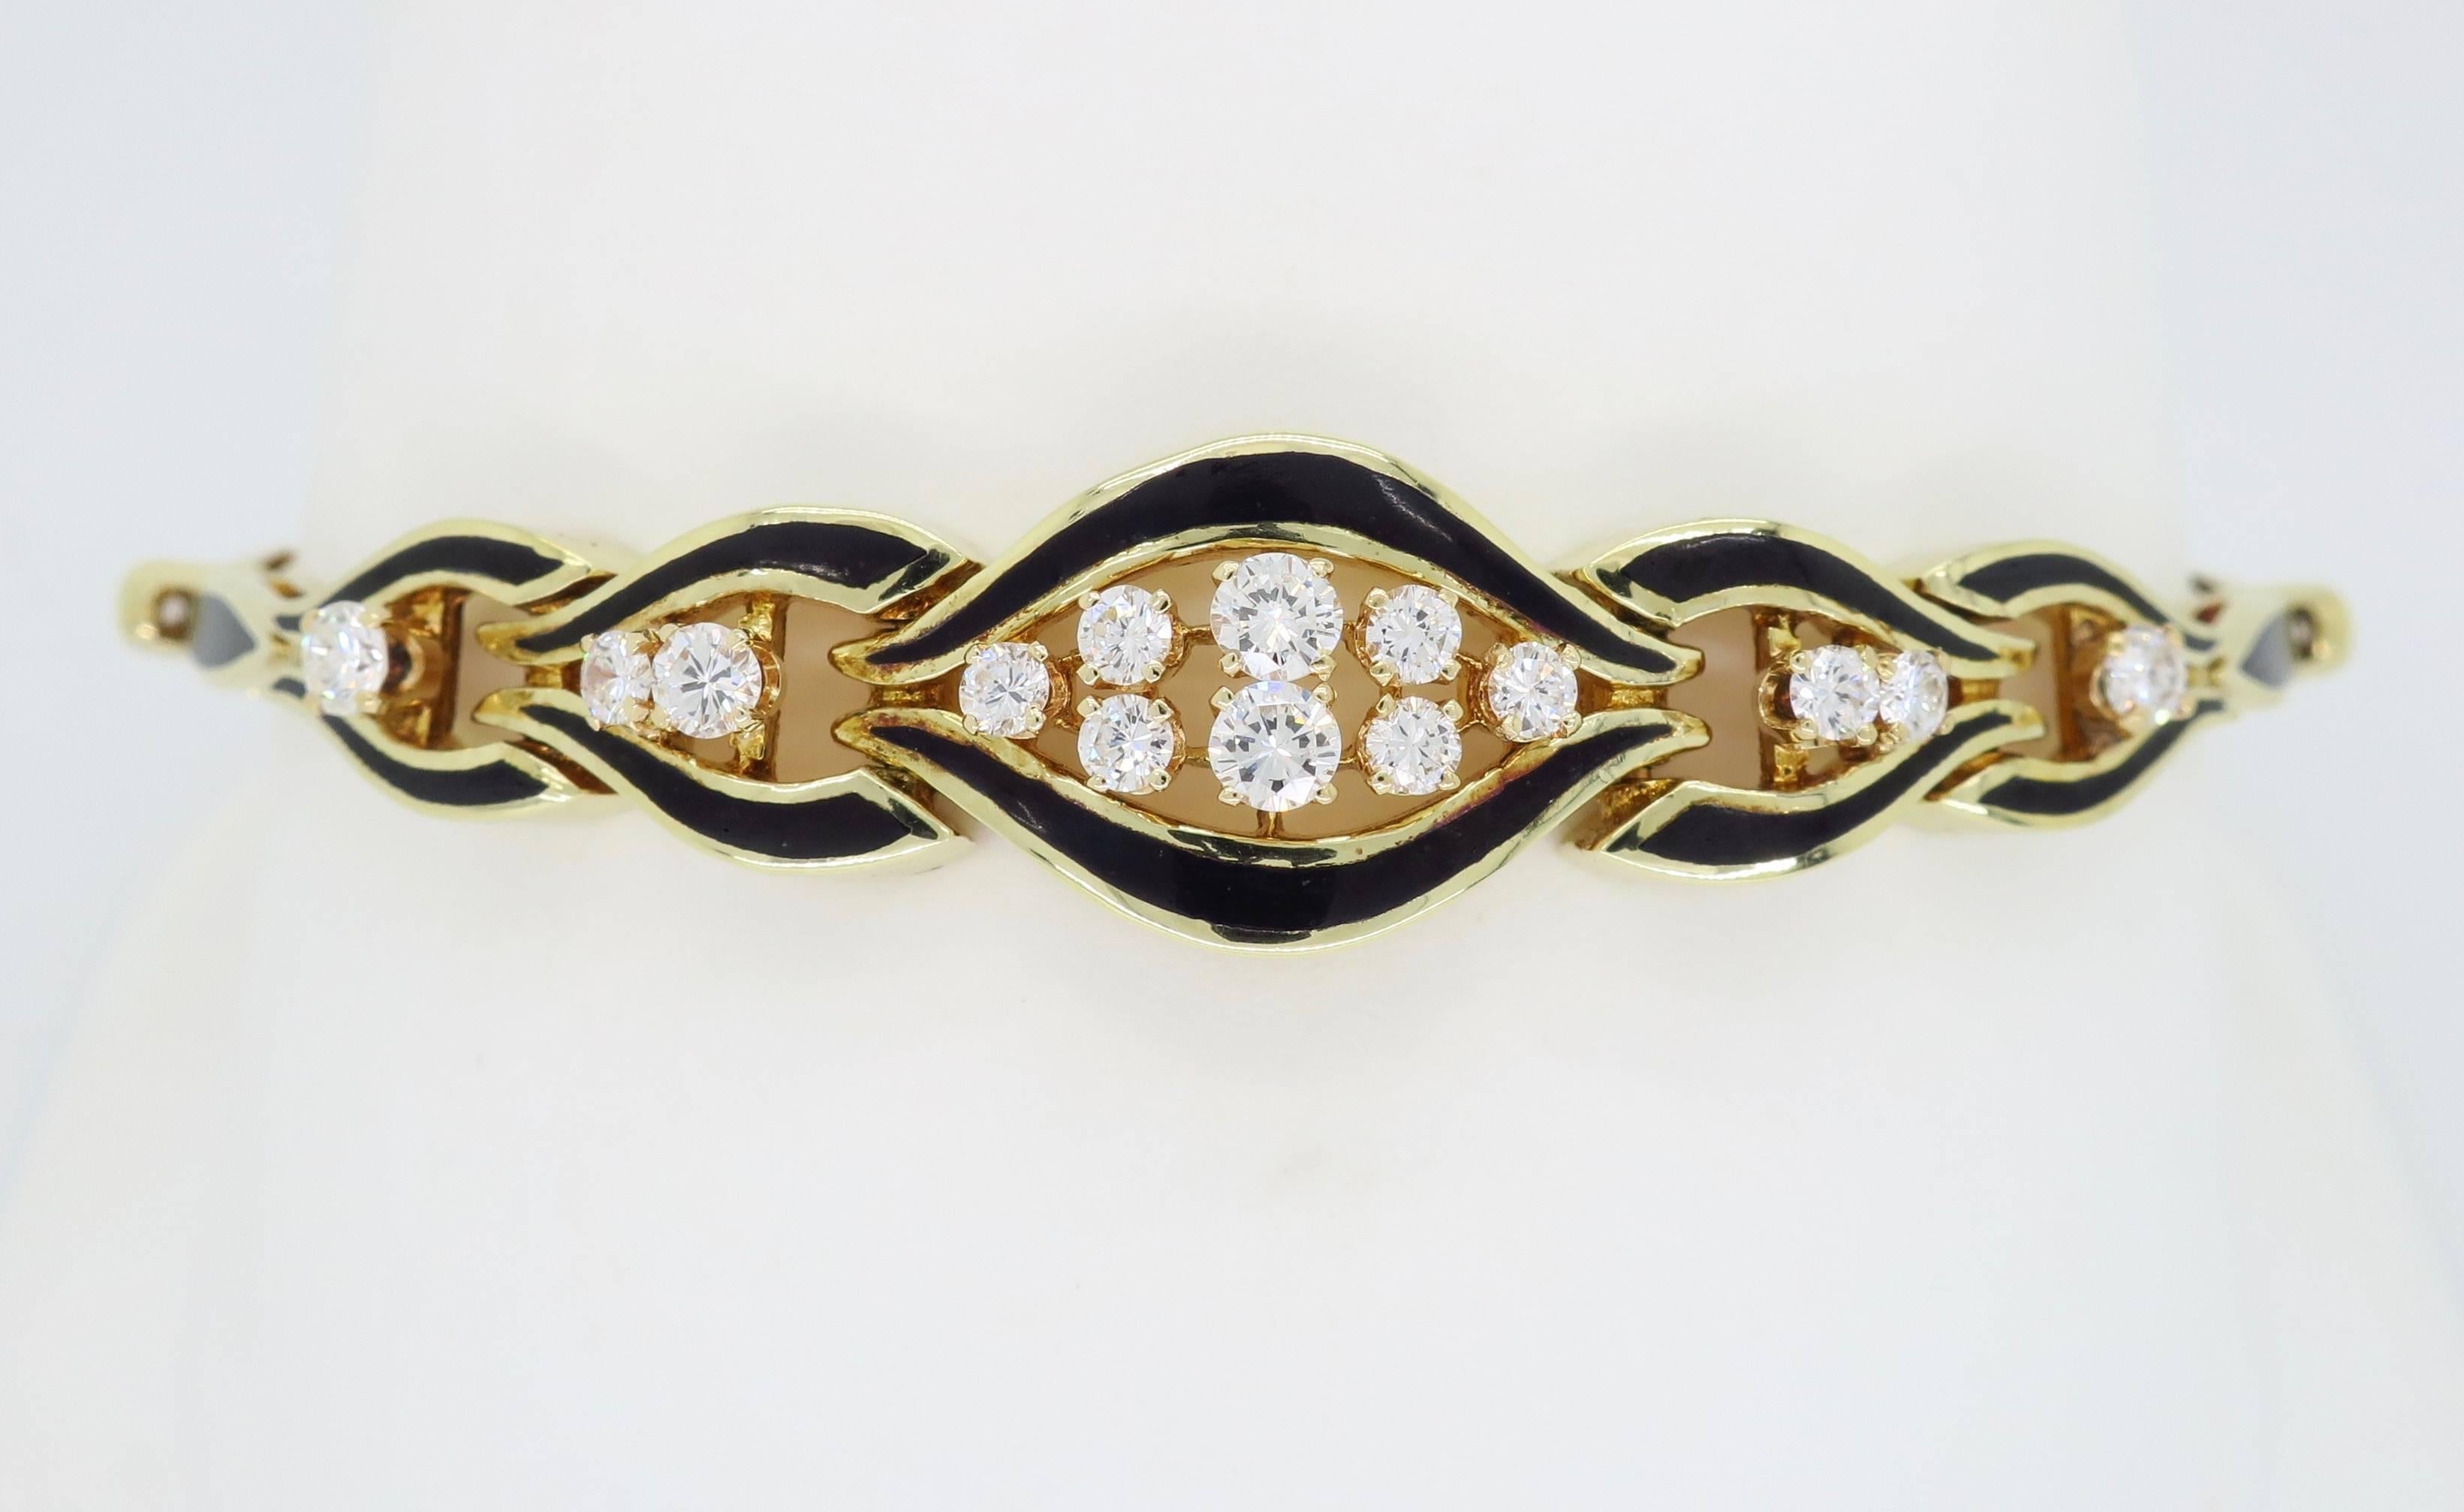 Unique 14K Yellow Gold and Black Enamel bracelet features 22 Round Brilliant Cut Diamonds with G-I color and VS2-SI2 clarity. There is approximately 1.10CTW of Diamonds in this beautiful bracelet. The bracelet is 7” in length and weighs 17.7 grams.